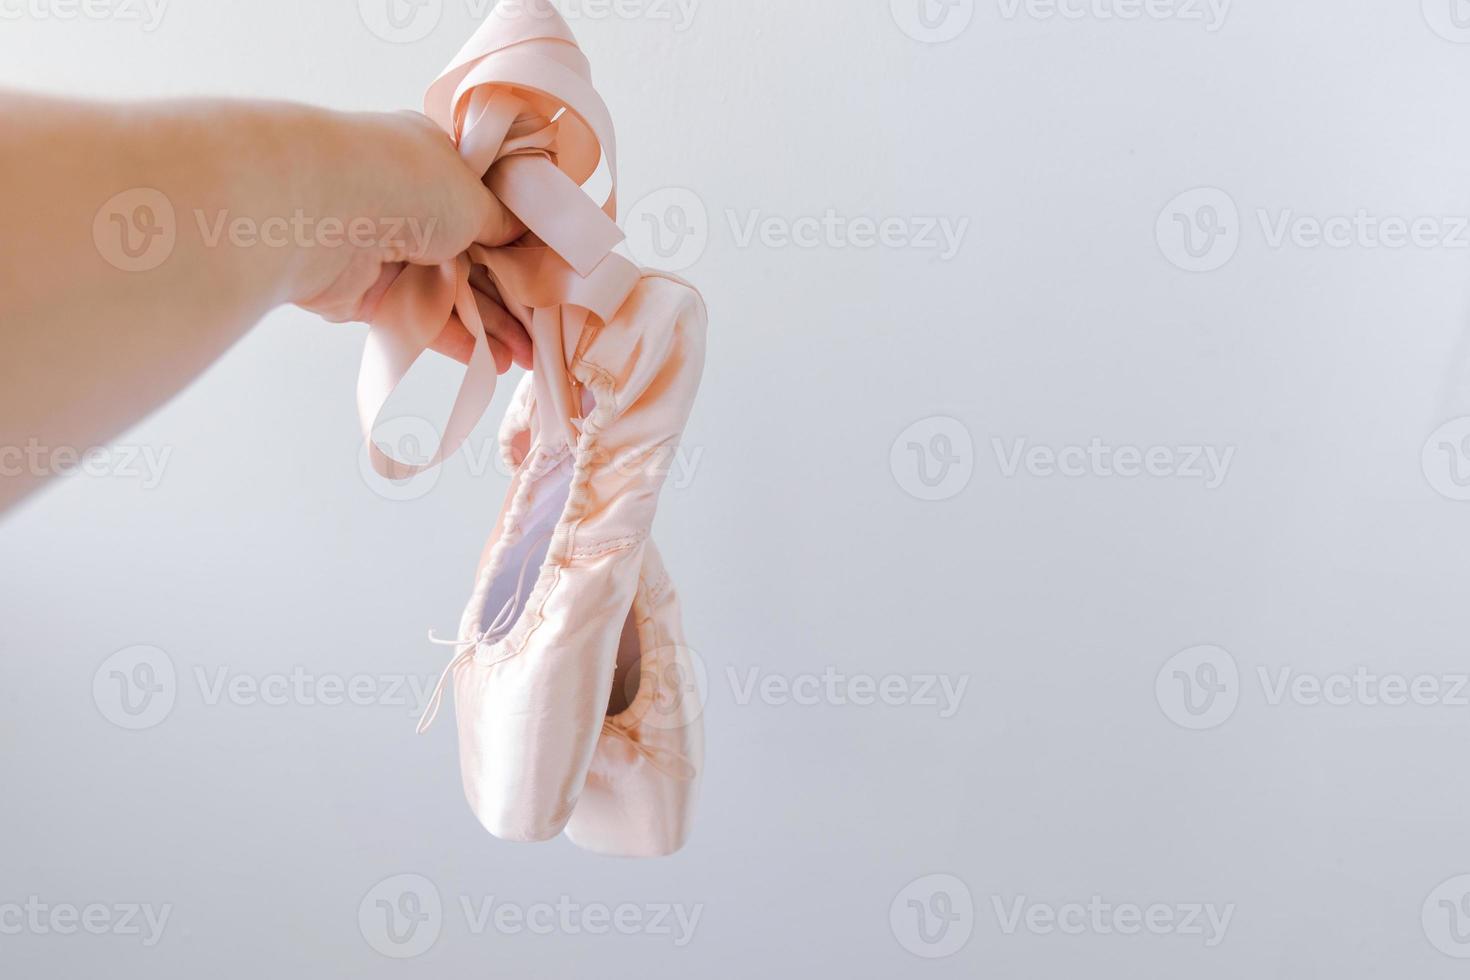 Ballerina dancer hand holding new pastel beige ballet shoes with satin ribbon isolated on white background. Ballerina classical pointe shoes for dance training. Ballet school concept. Copy space. photo